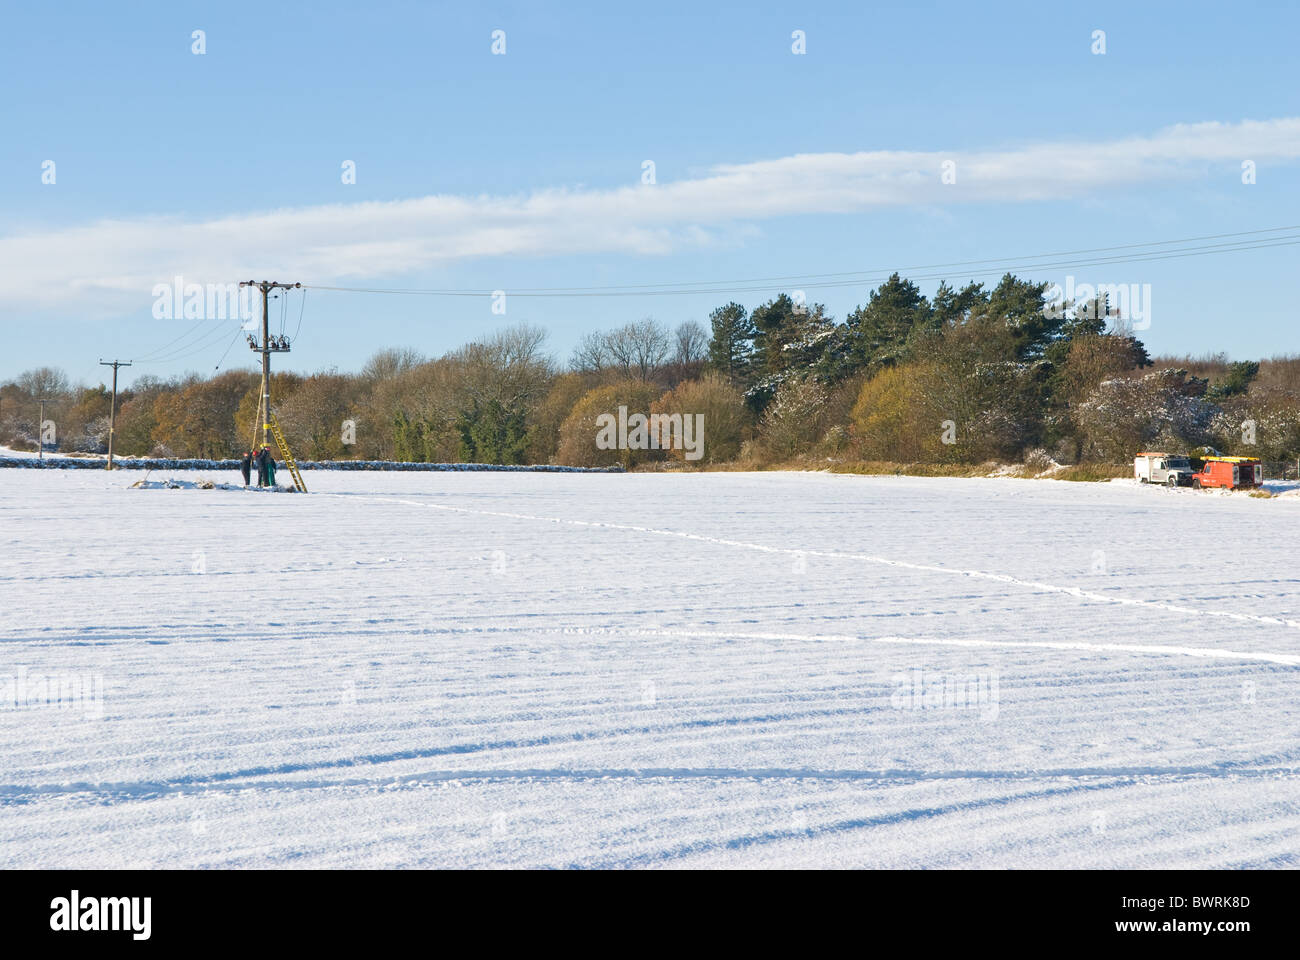 Electricity supply company E-On employers working on a 11kV overhead line during the winter after a snowy weather. Stock Photo